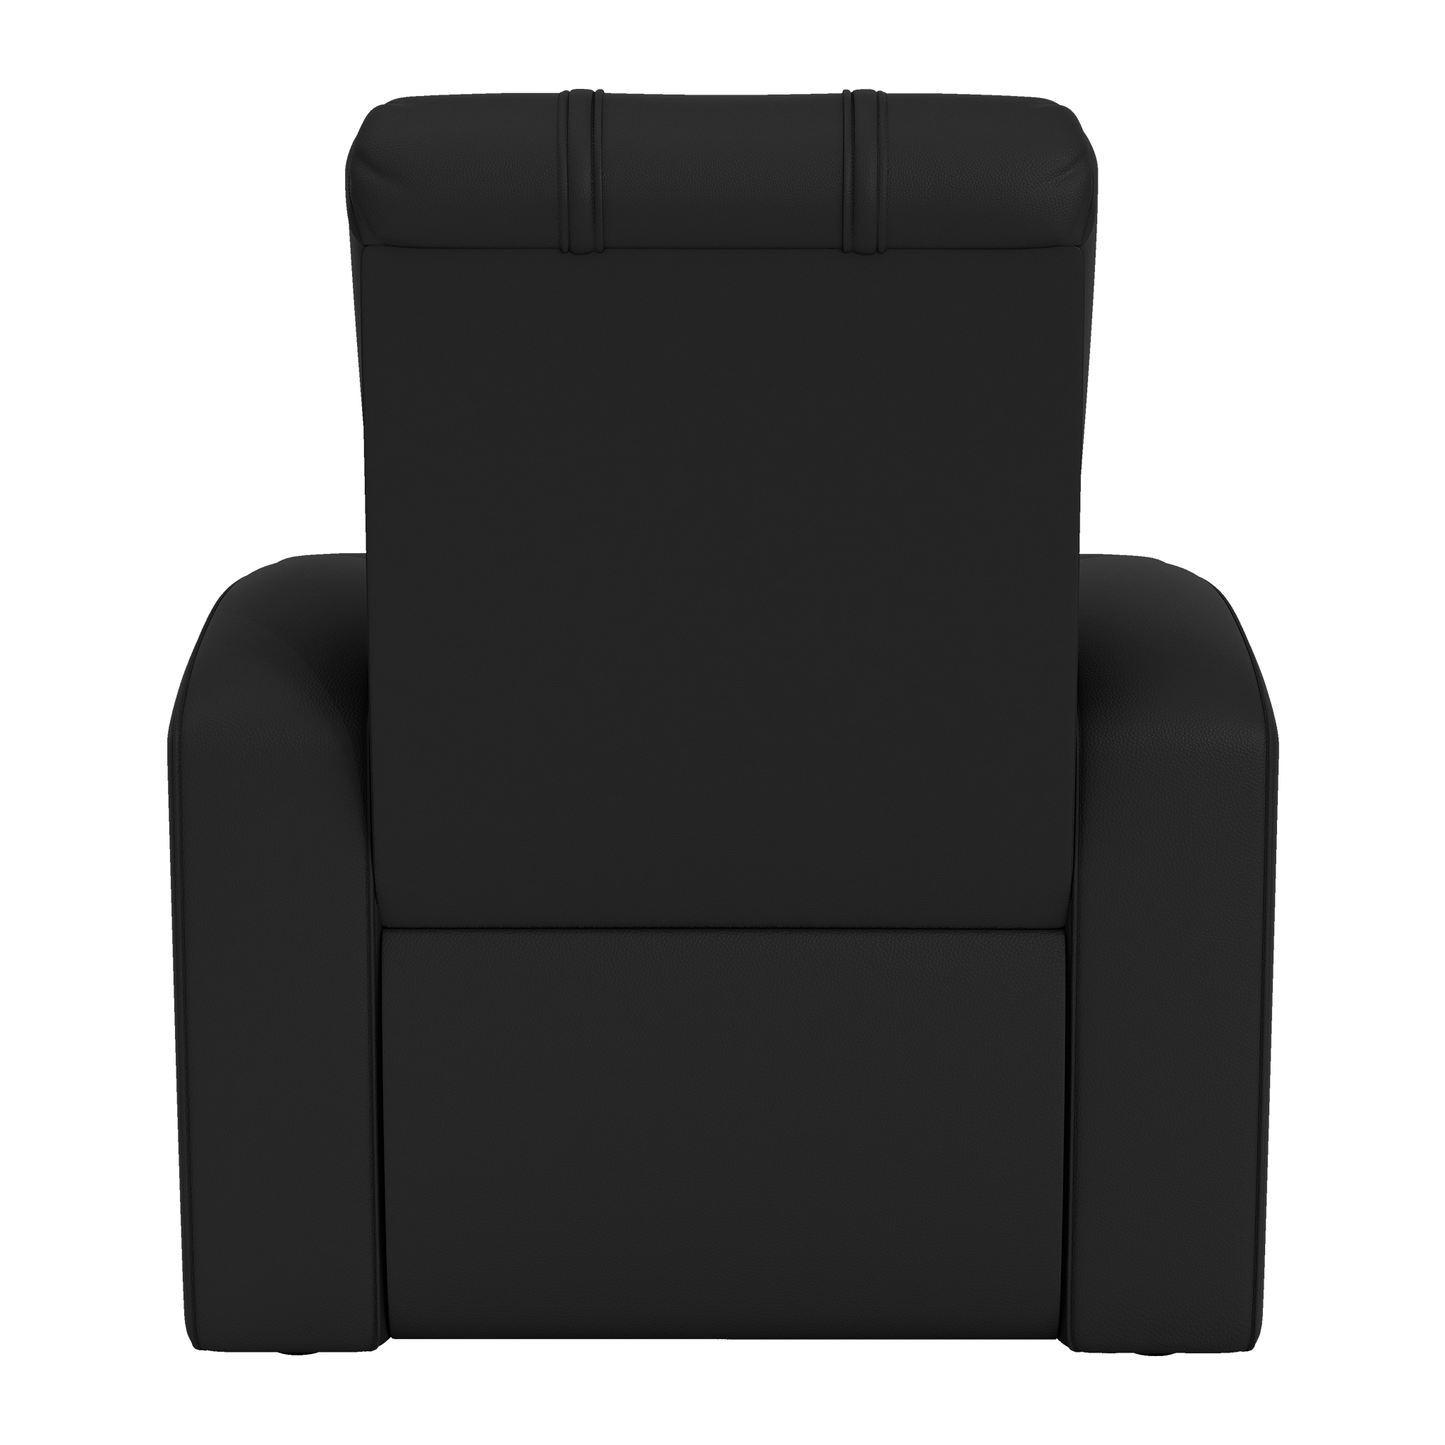 Relax Home Theater Recliner with Golden State Warriors Logo